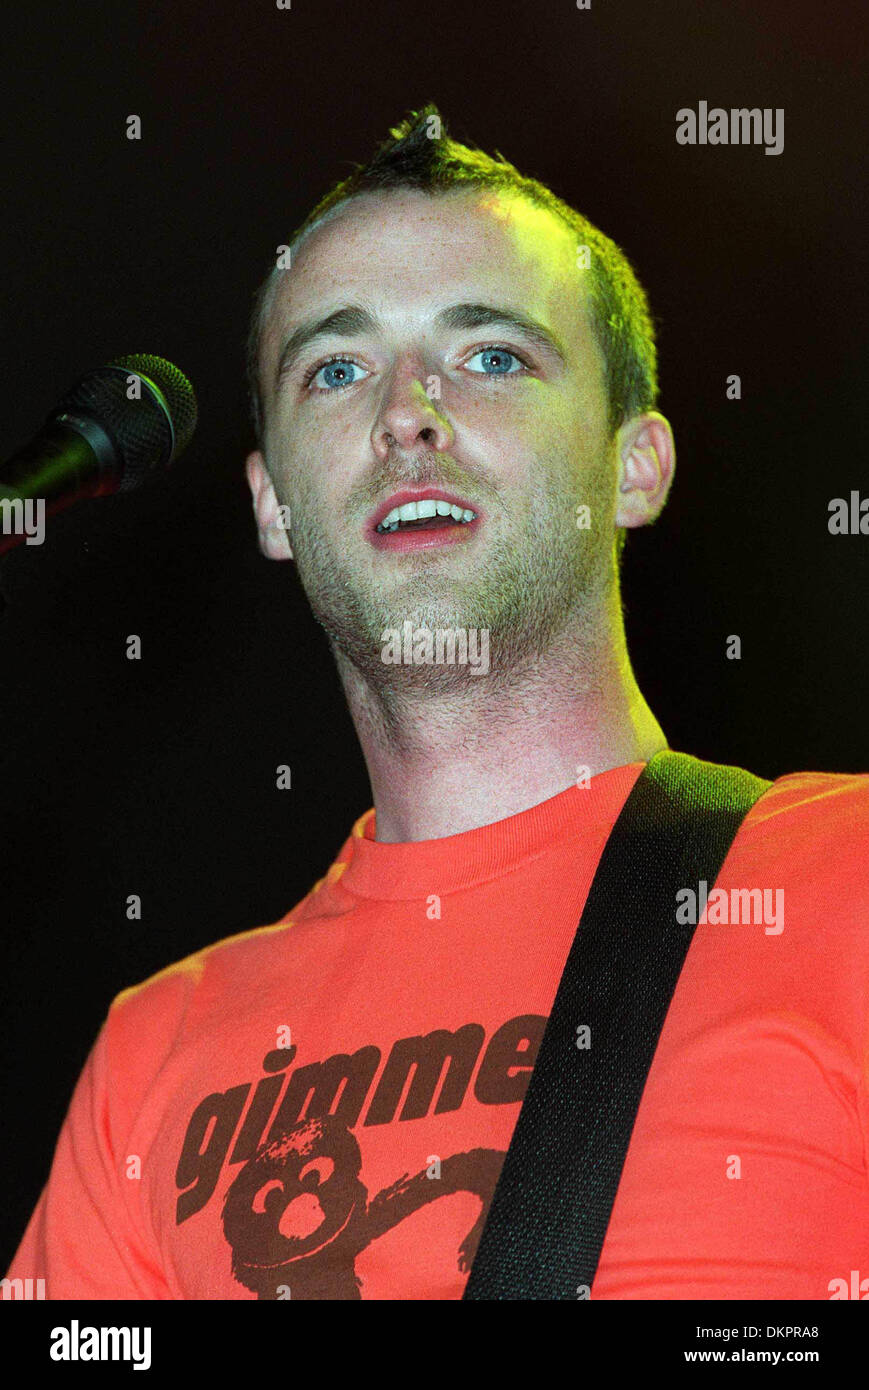 FRANCIS HEALY.SINGER ''TRAVIS''.22/09/1999.T77D24A Stock Photo